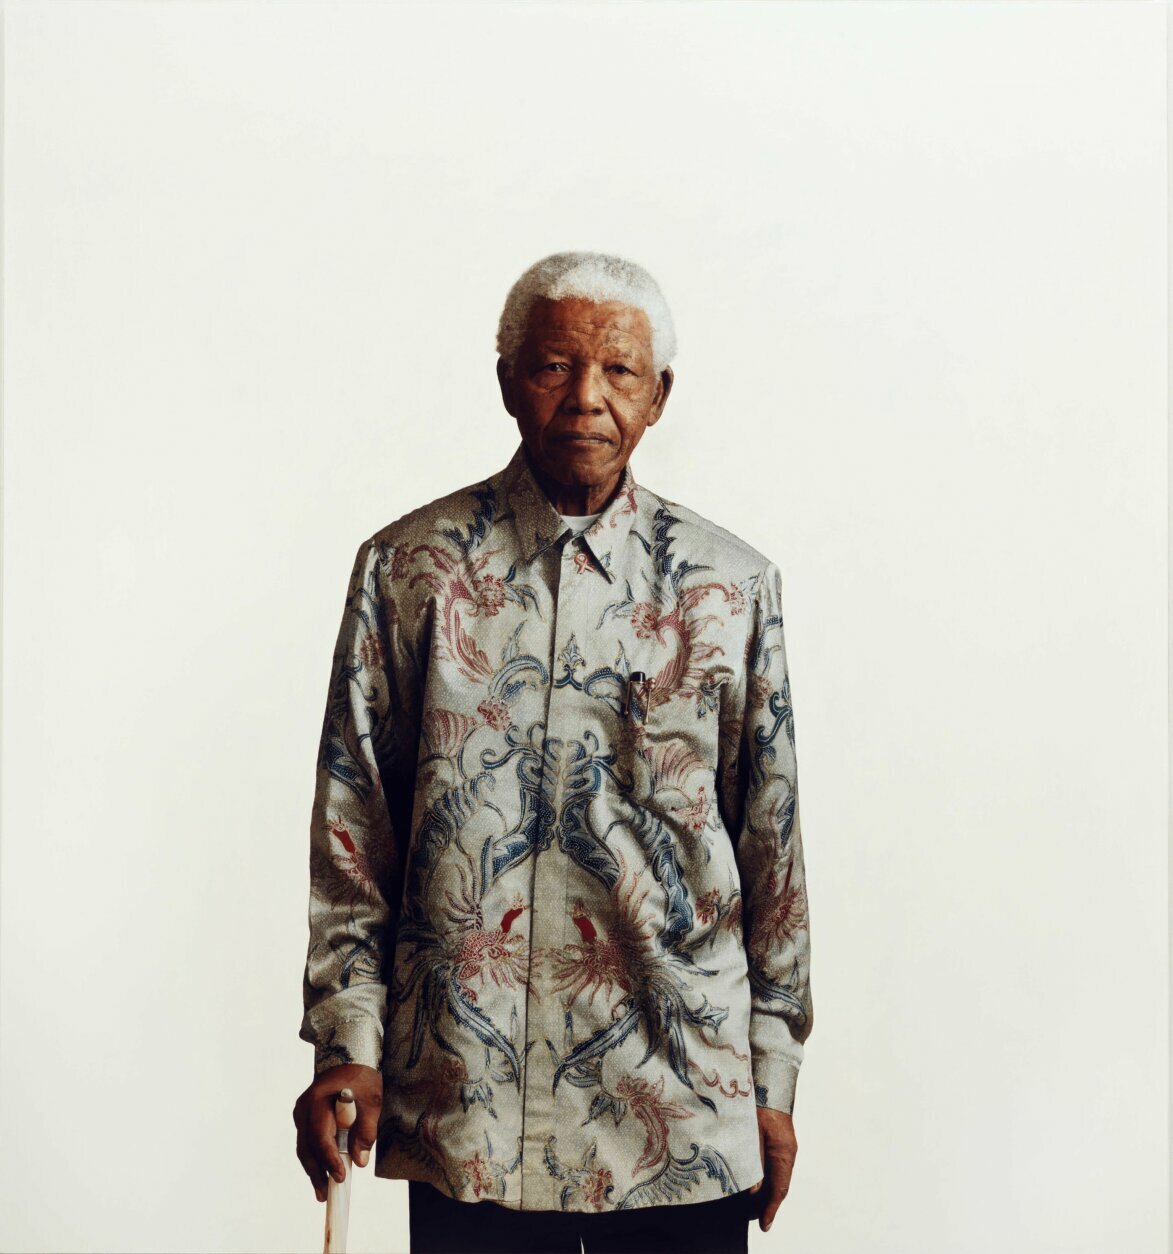 <p>This oil-on-canvas portrait of Nelson Mandela was painted by Robert McCurdy in 2009.</p>
